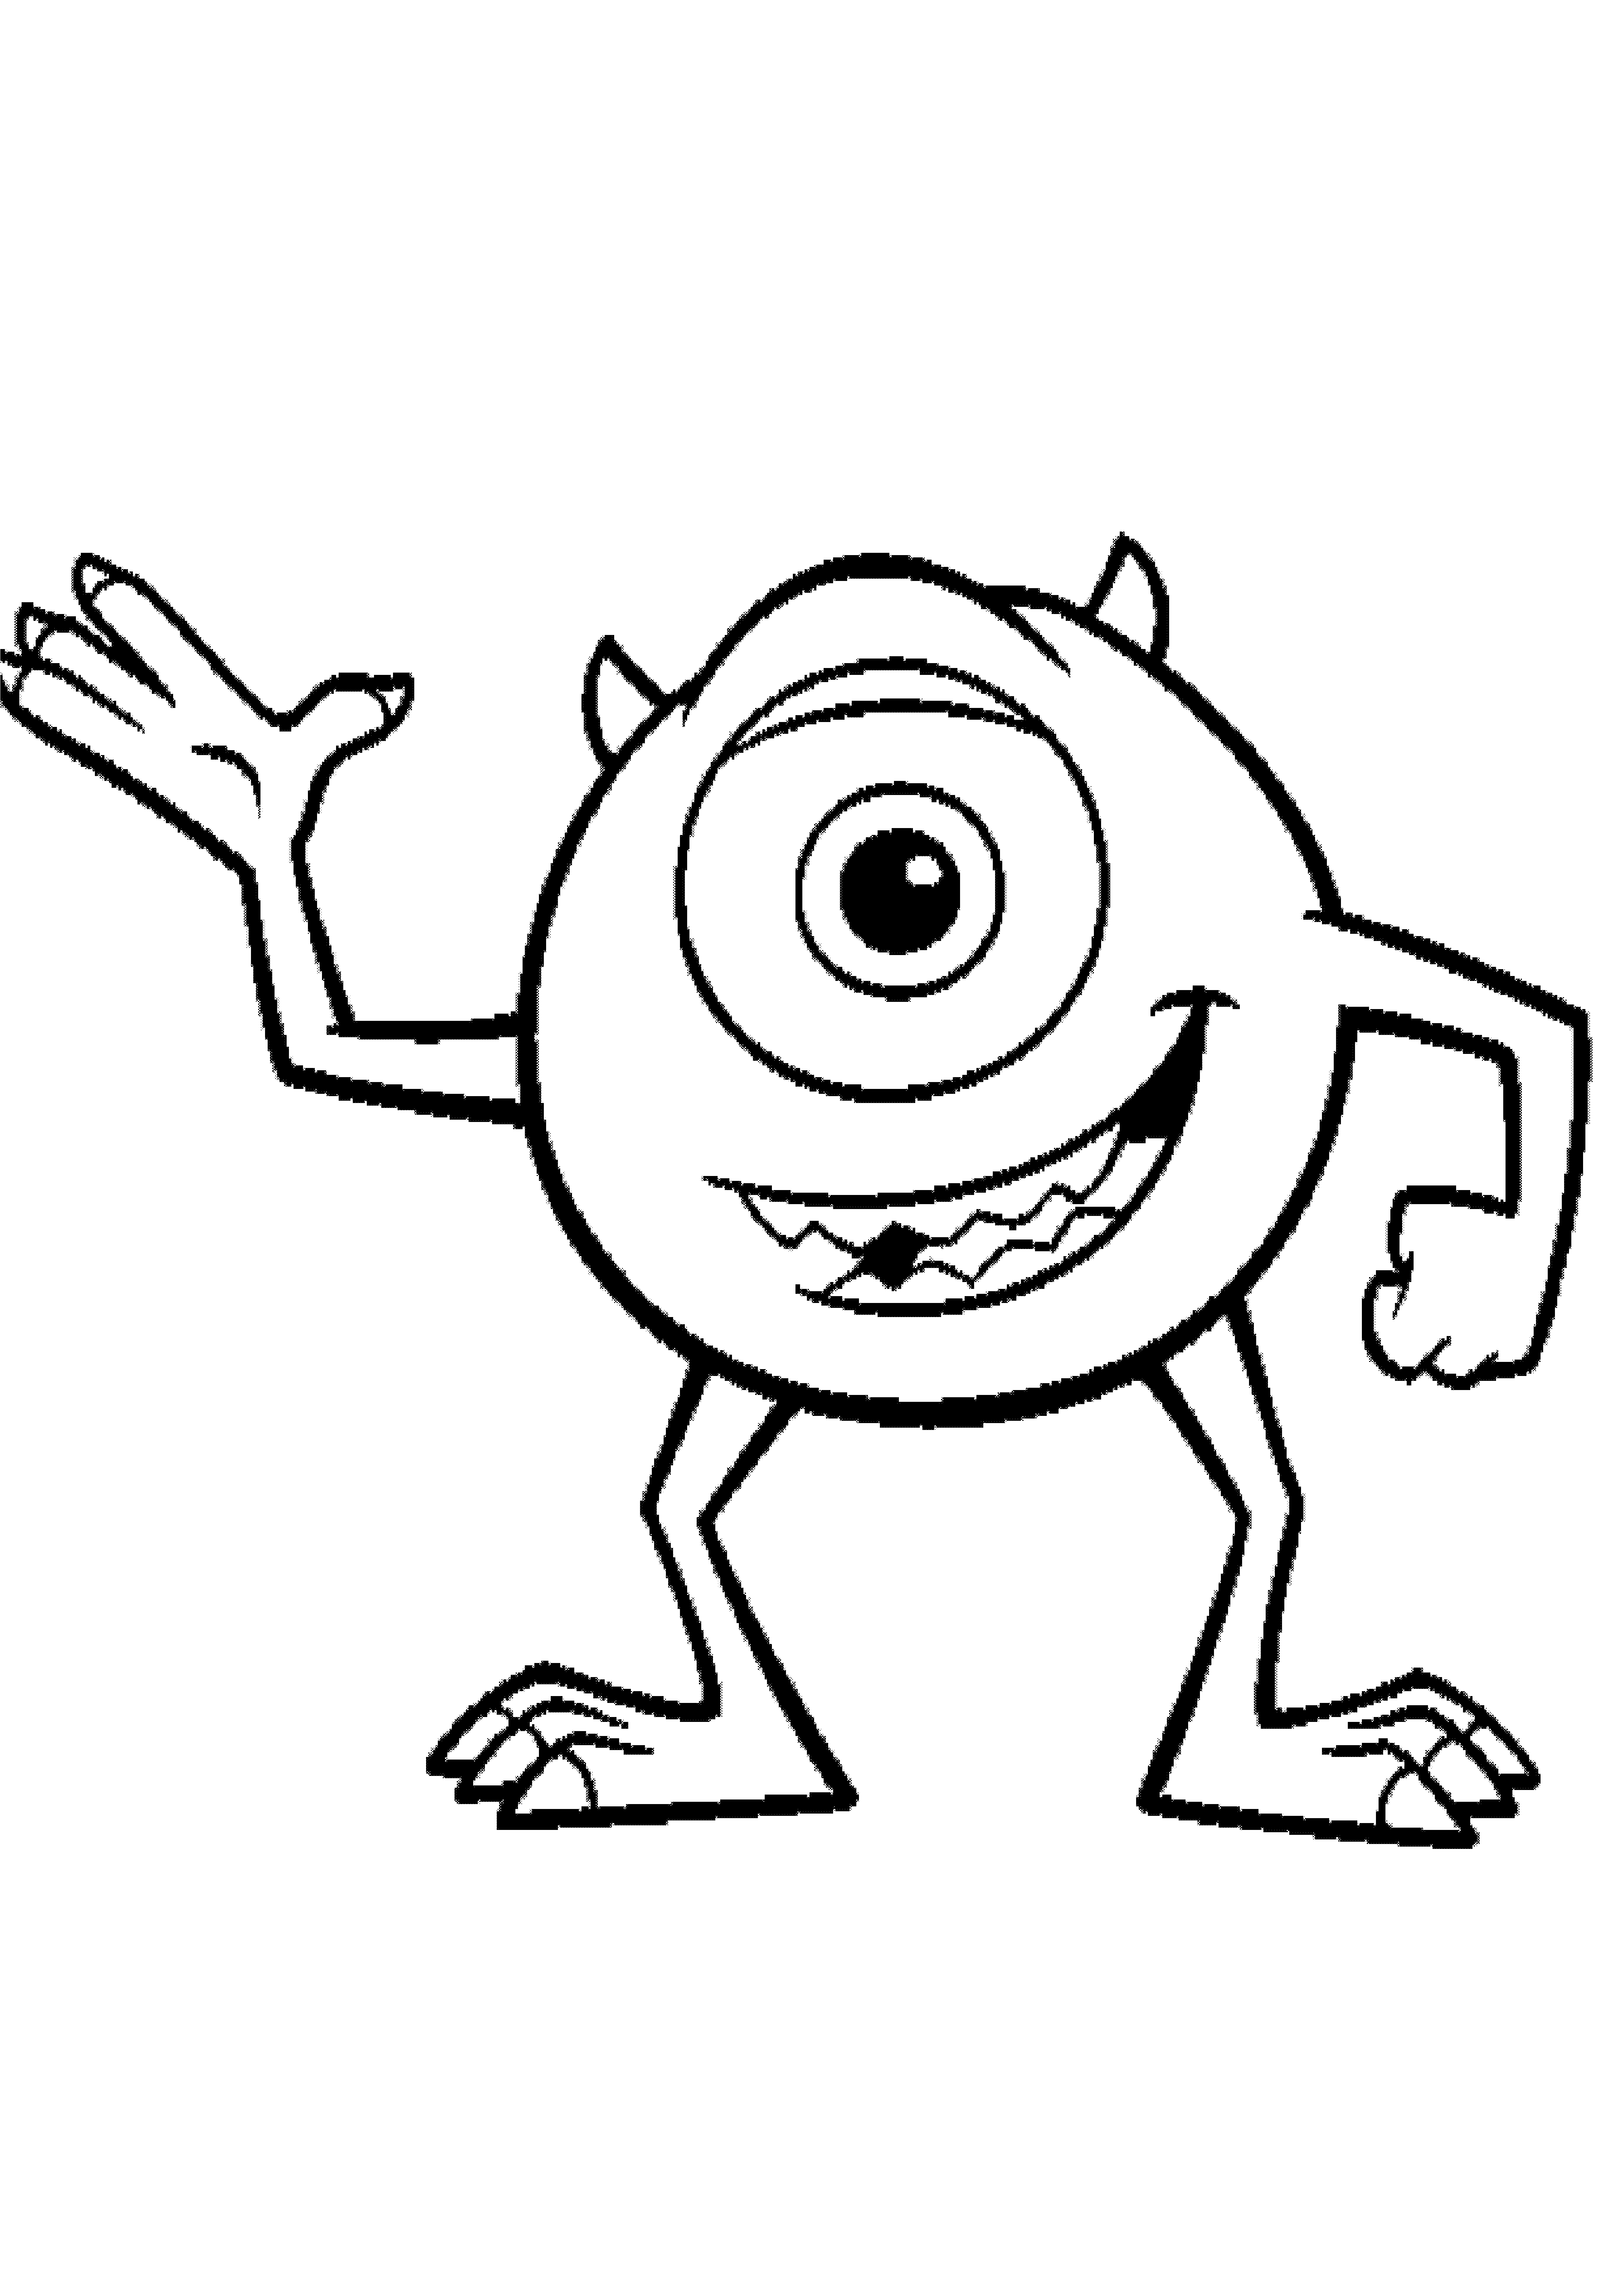 Images For > Baby Monsters Inc Clip Art